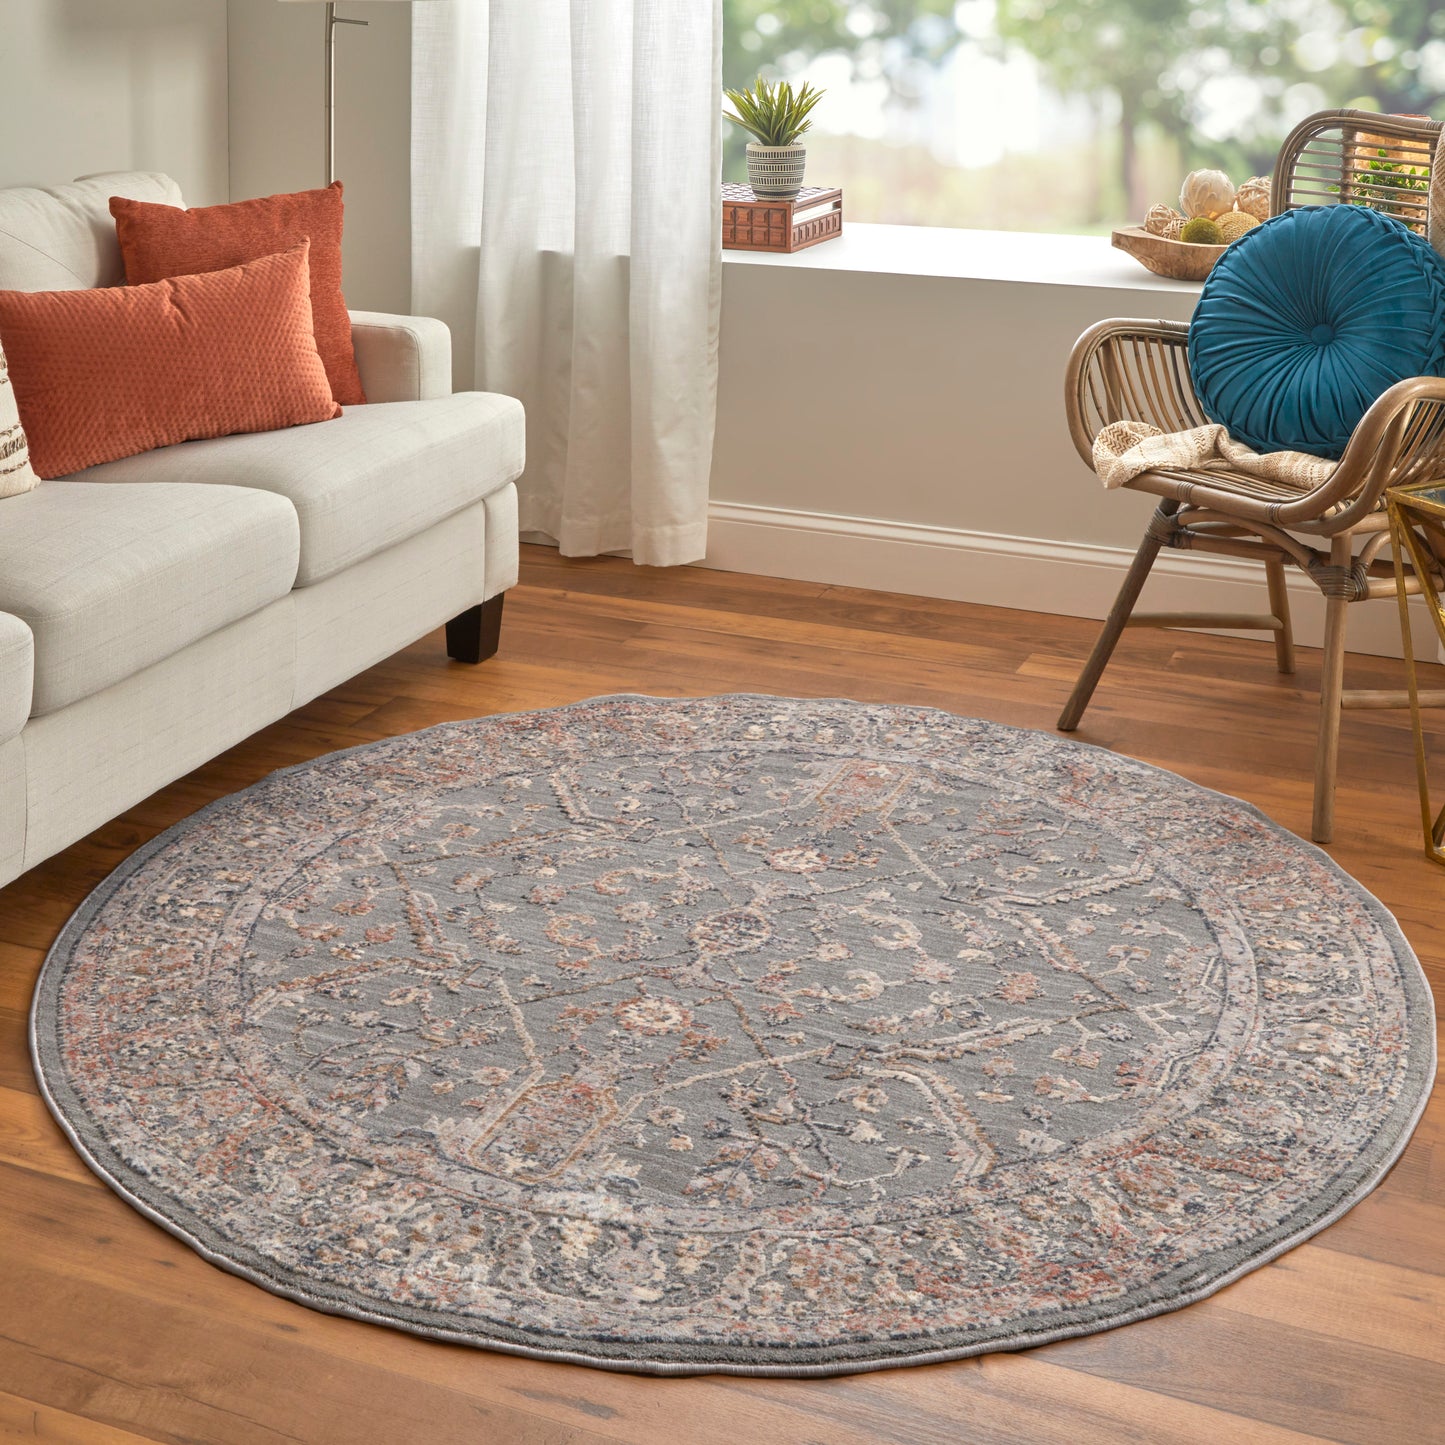 Thackery 39D3F Power Loomed Synthetic Blend Indoor Area Rug by Feizy Rugs